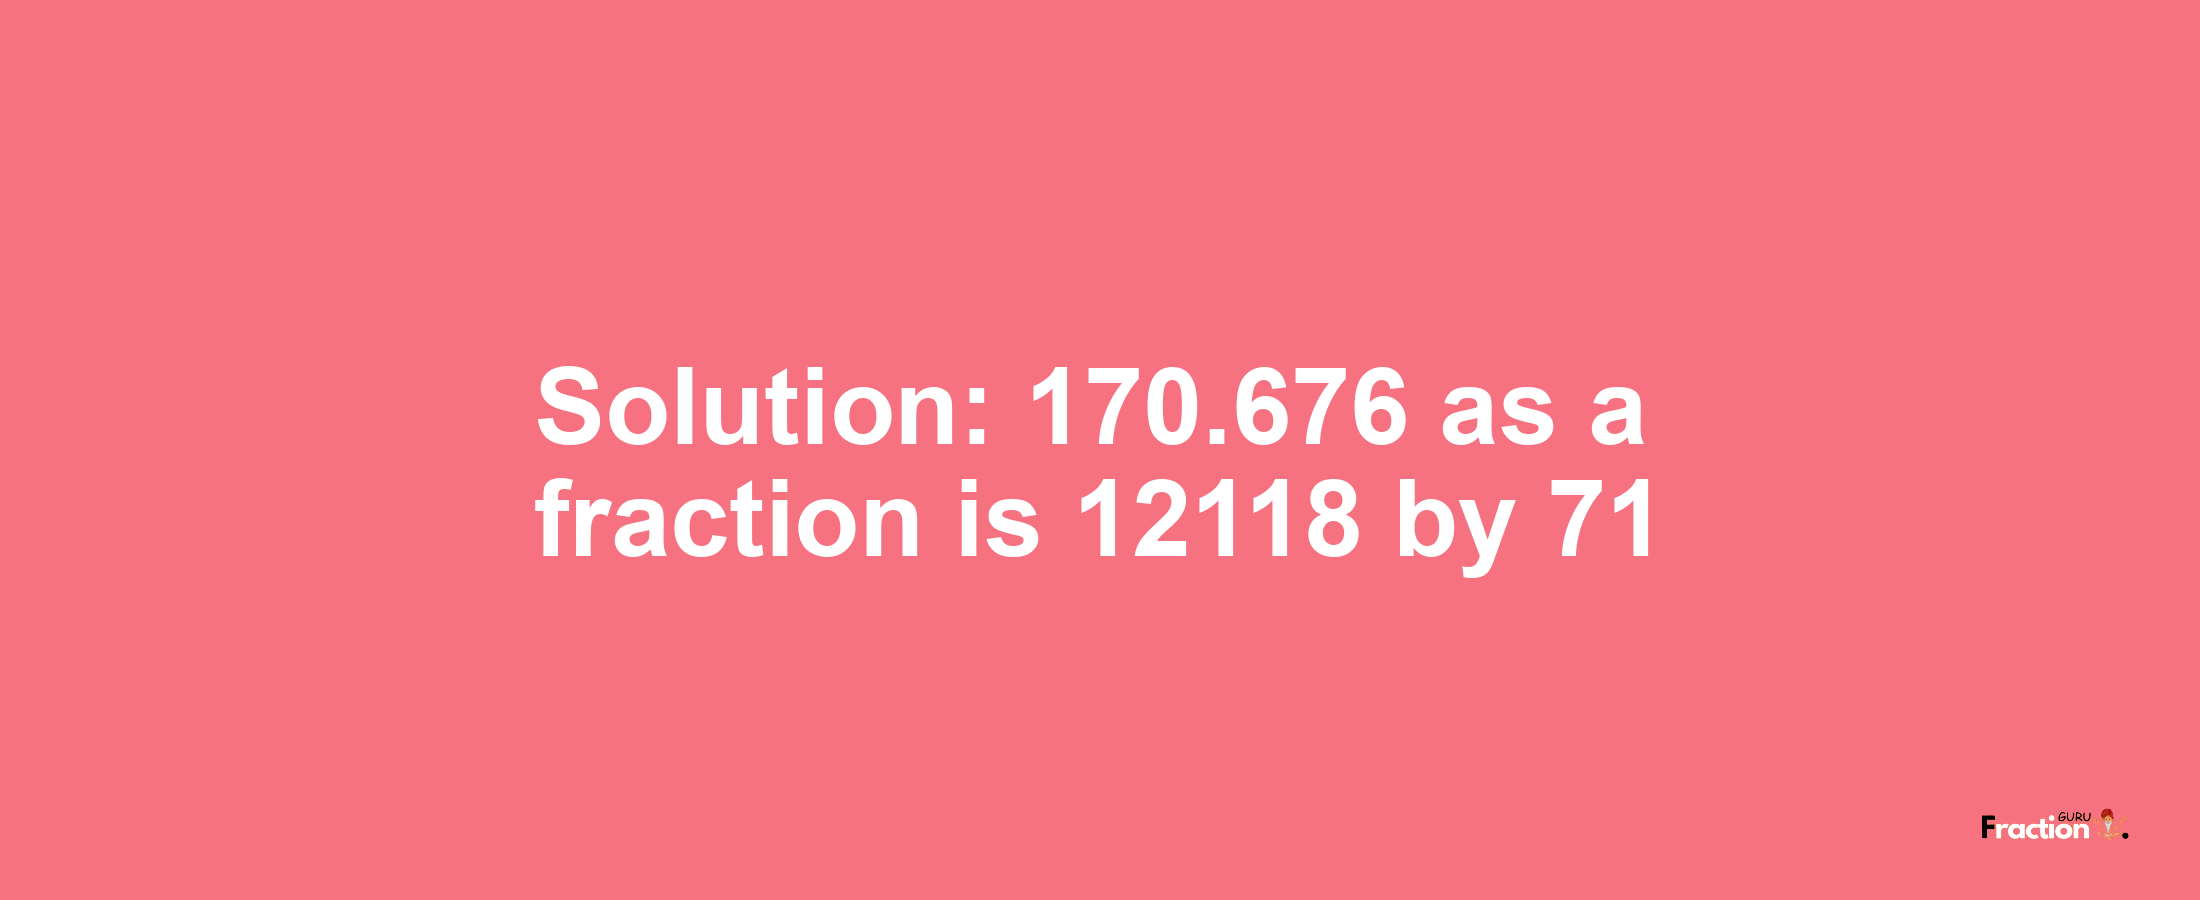 Solution:170.676 as a fraction is 12118/71